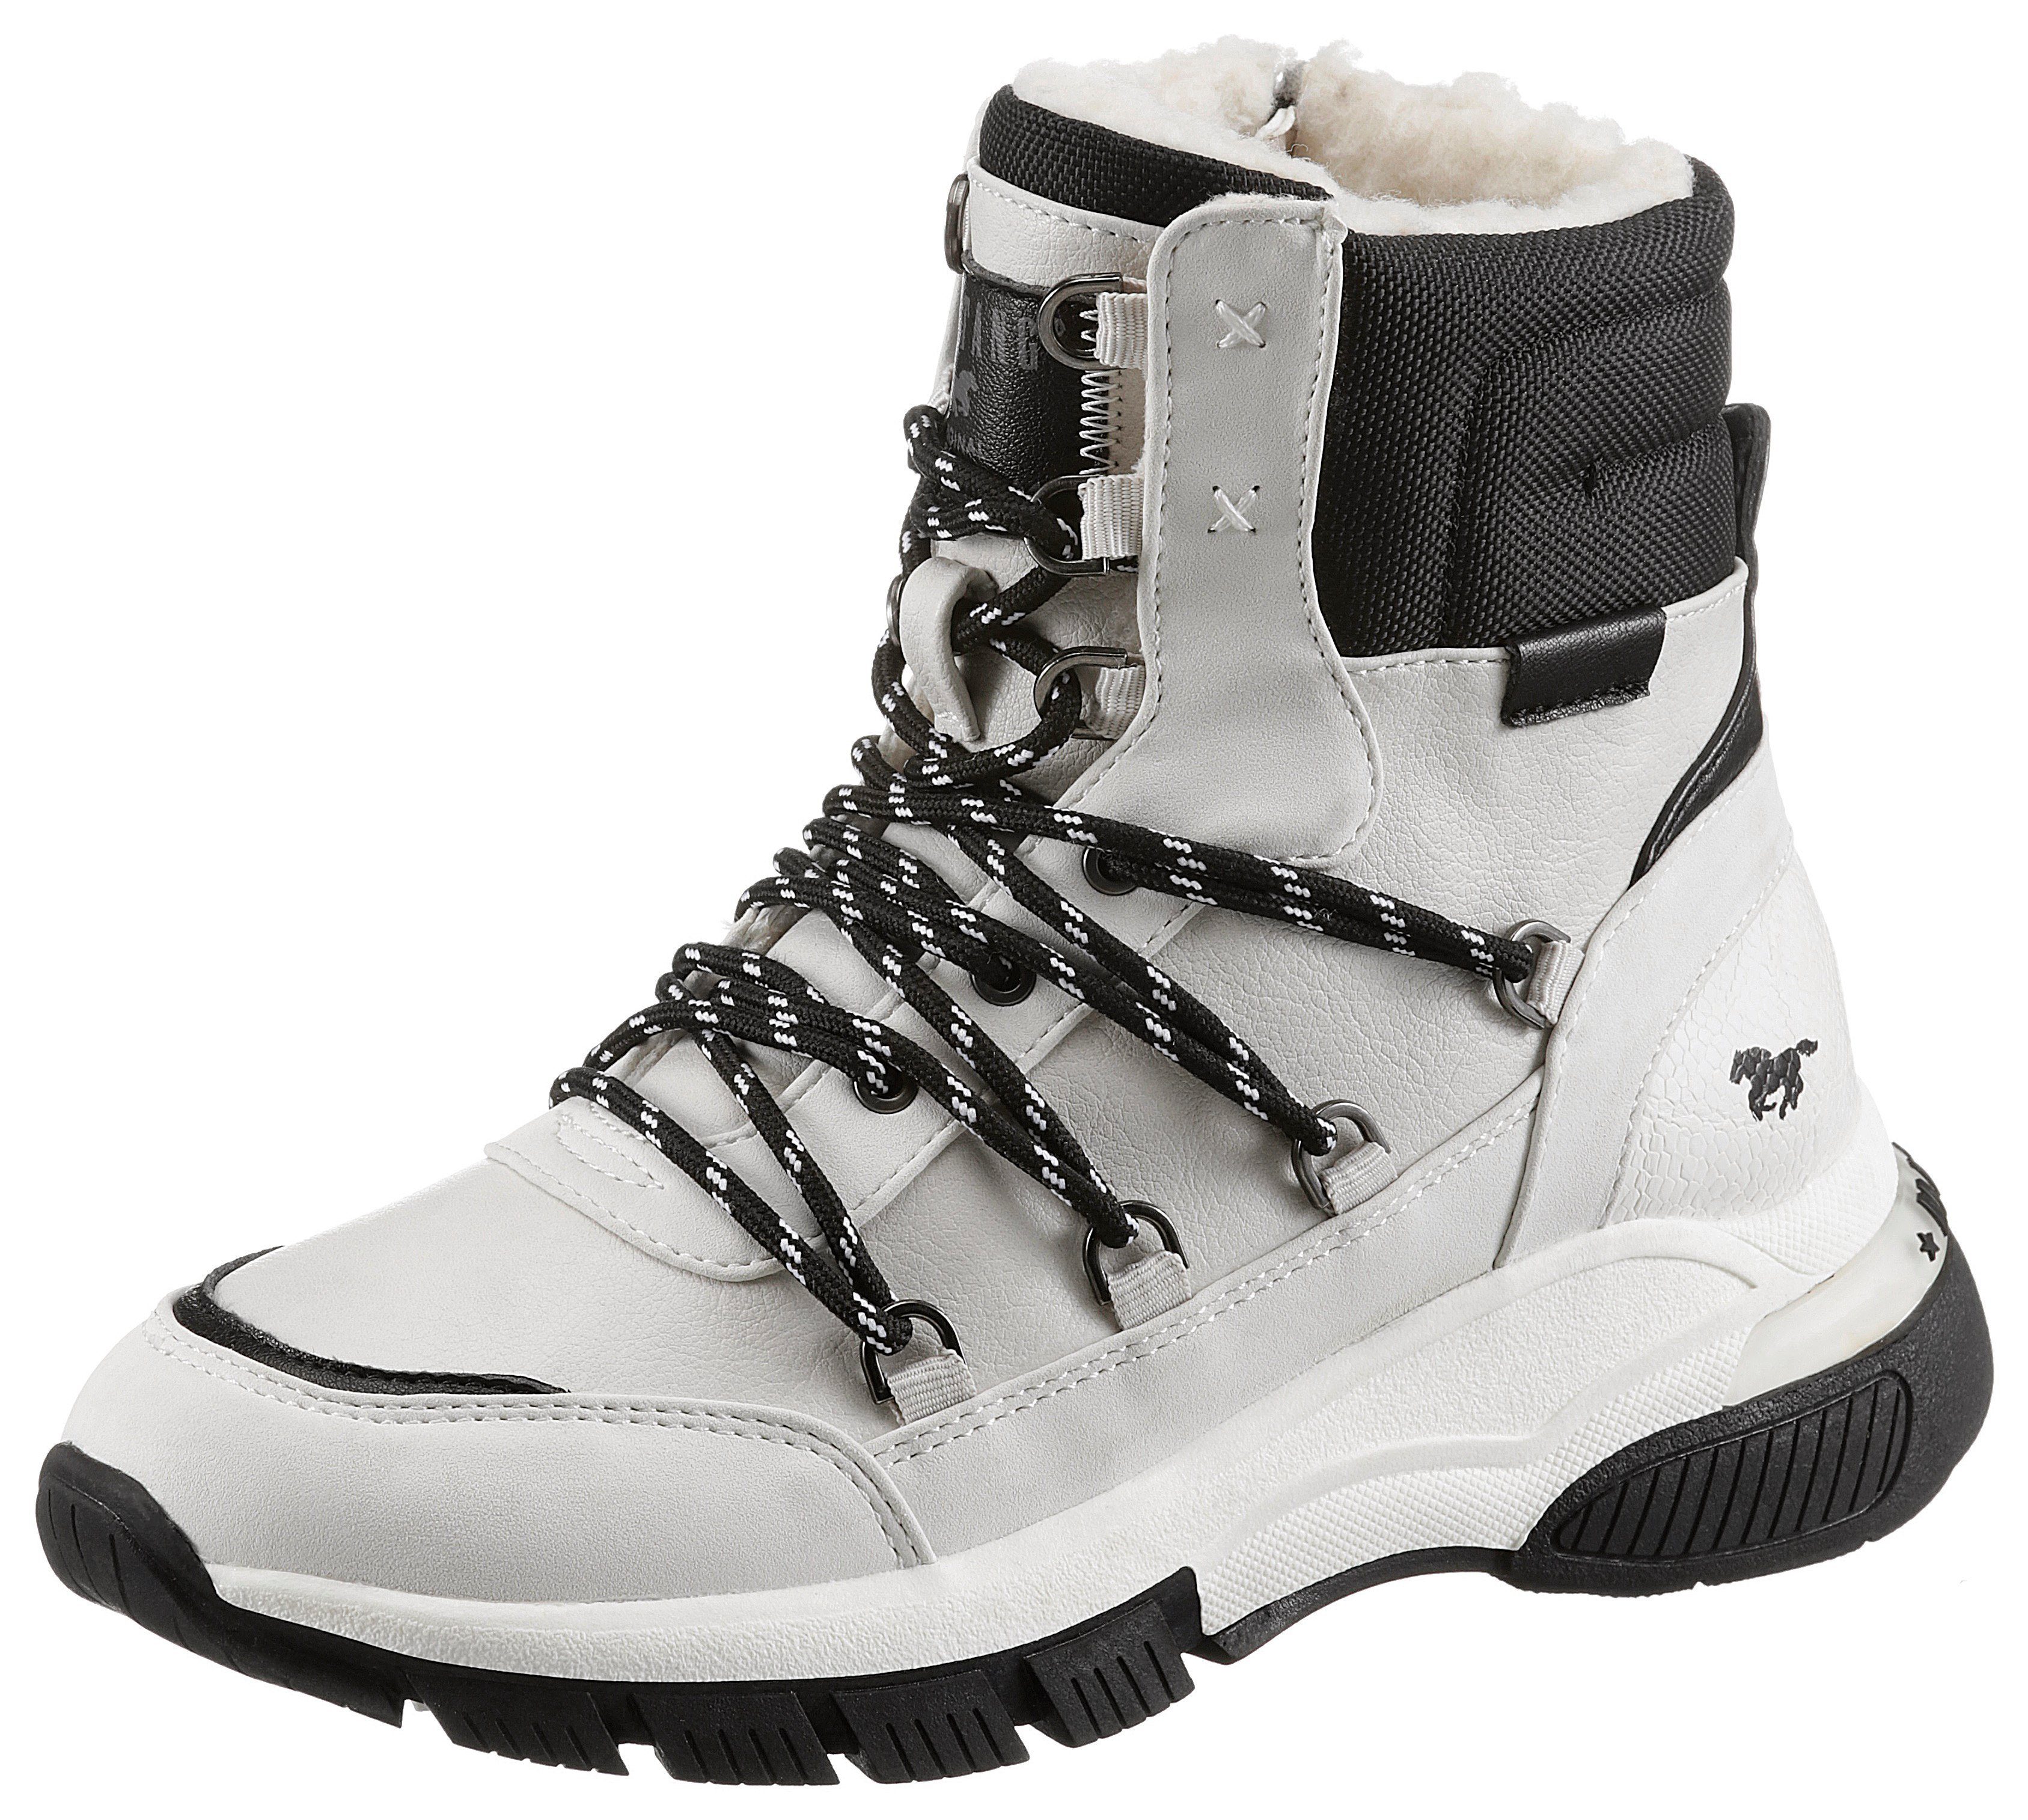 Winterboots mit Laufsohle Shoes Mustang zweifarbiger offwhite